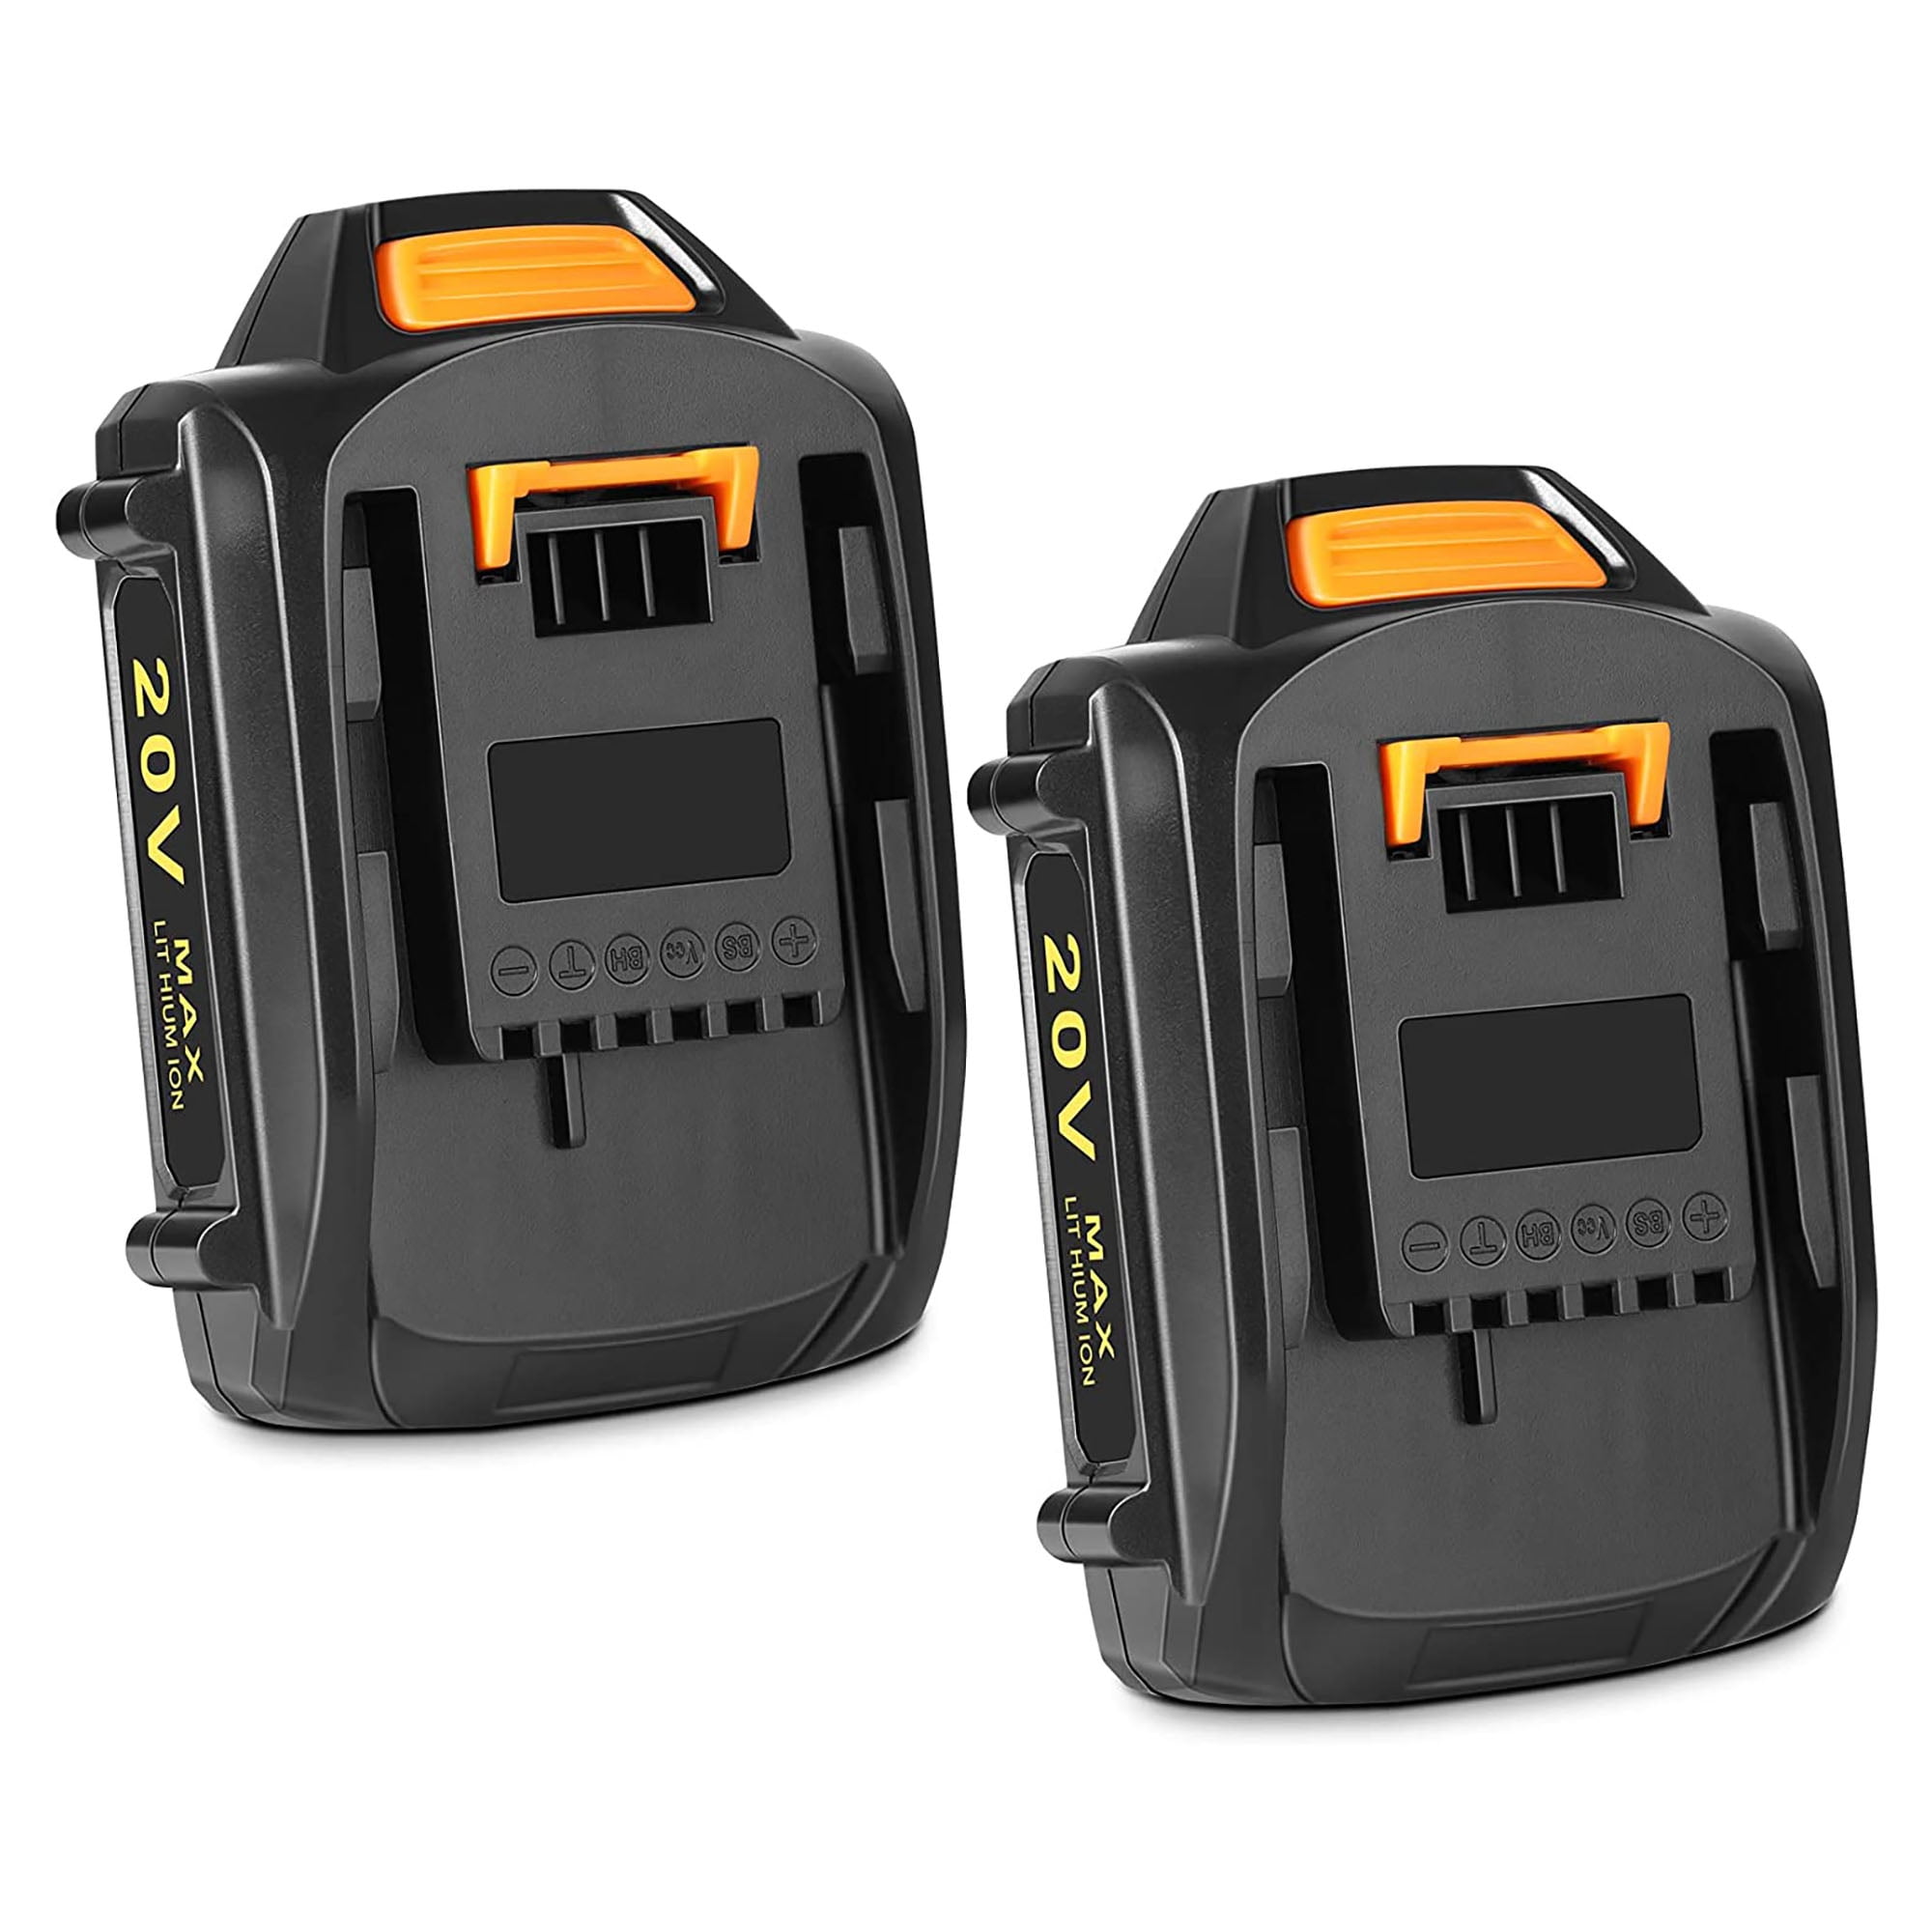 VANON 20V 4.0Ah Replacement for Worx 20V Battery WA3520 MAX Lithium ion  WG151s WG155s WG251s WG540s WG890 WG891,2Pack 